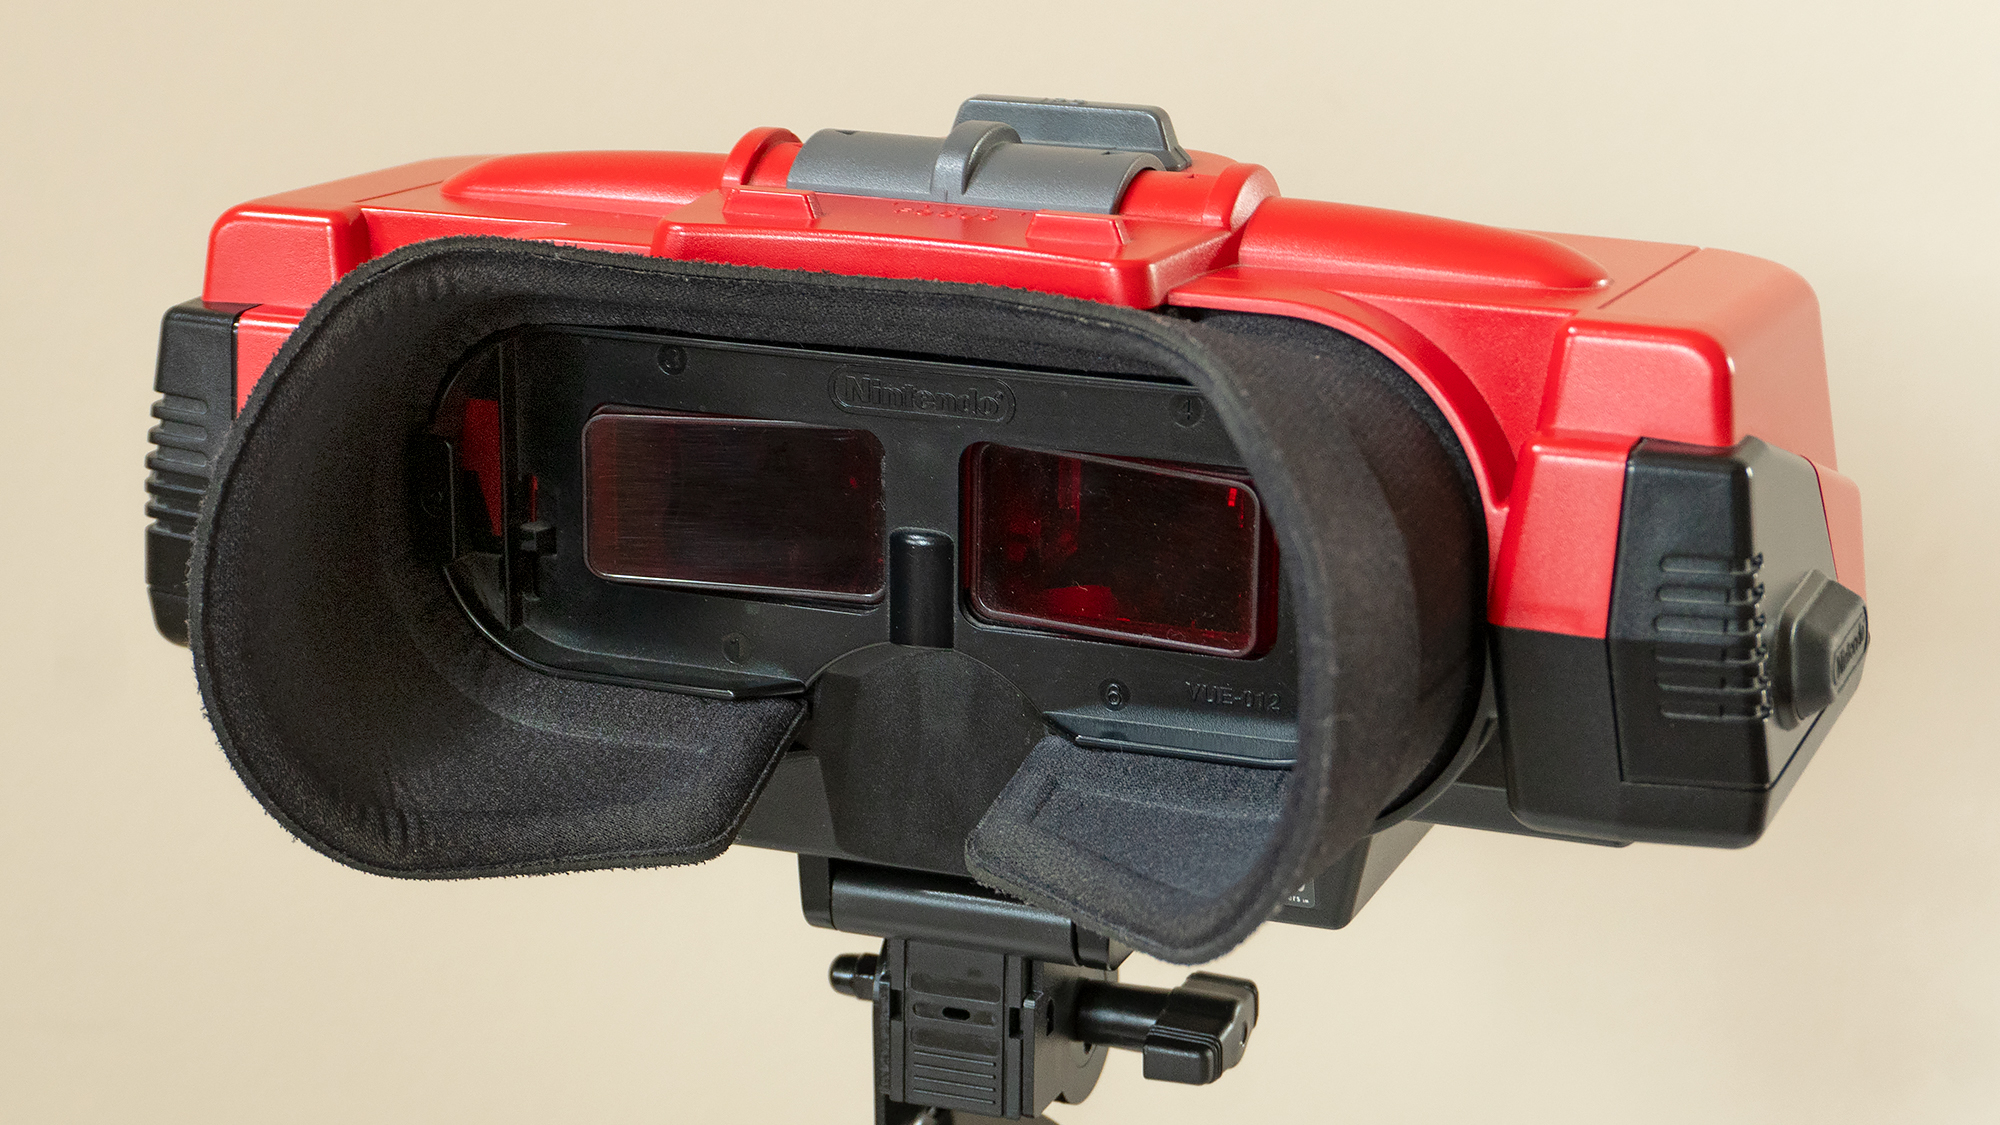 For health and safety reasons the Virtual Boy could only be played while it was awkwardly perched on a table. (Photo: Andrew Liszewski, Gizmodo)